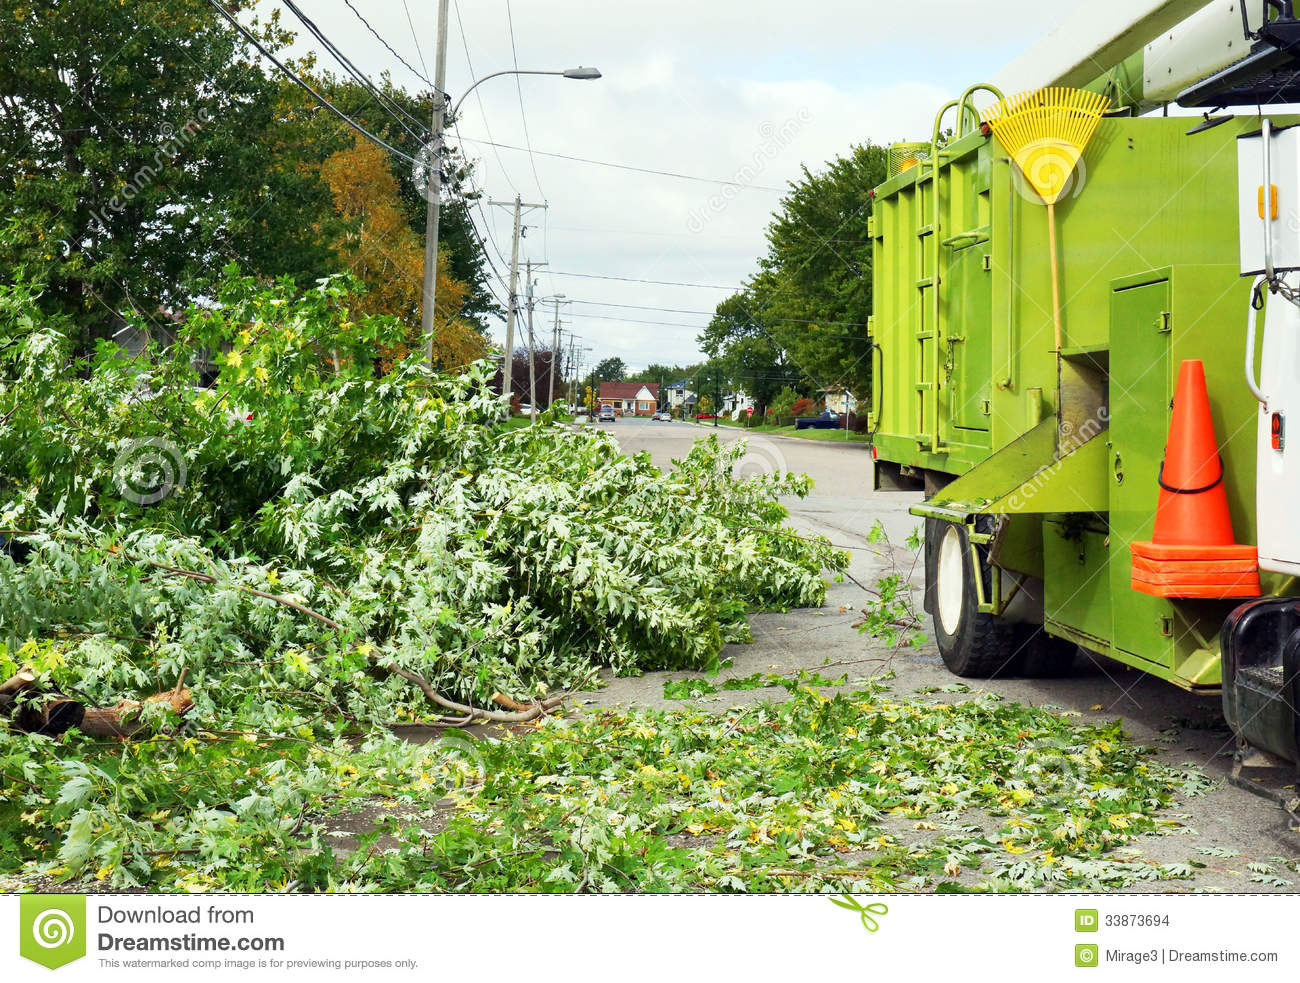 Wood Chipper Truck In The Street With Cut Down Tree Branches